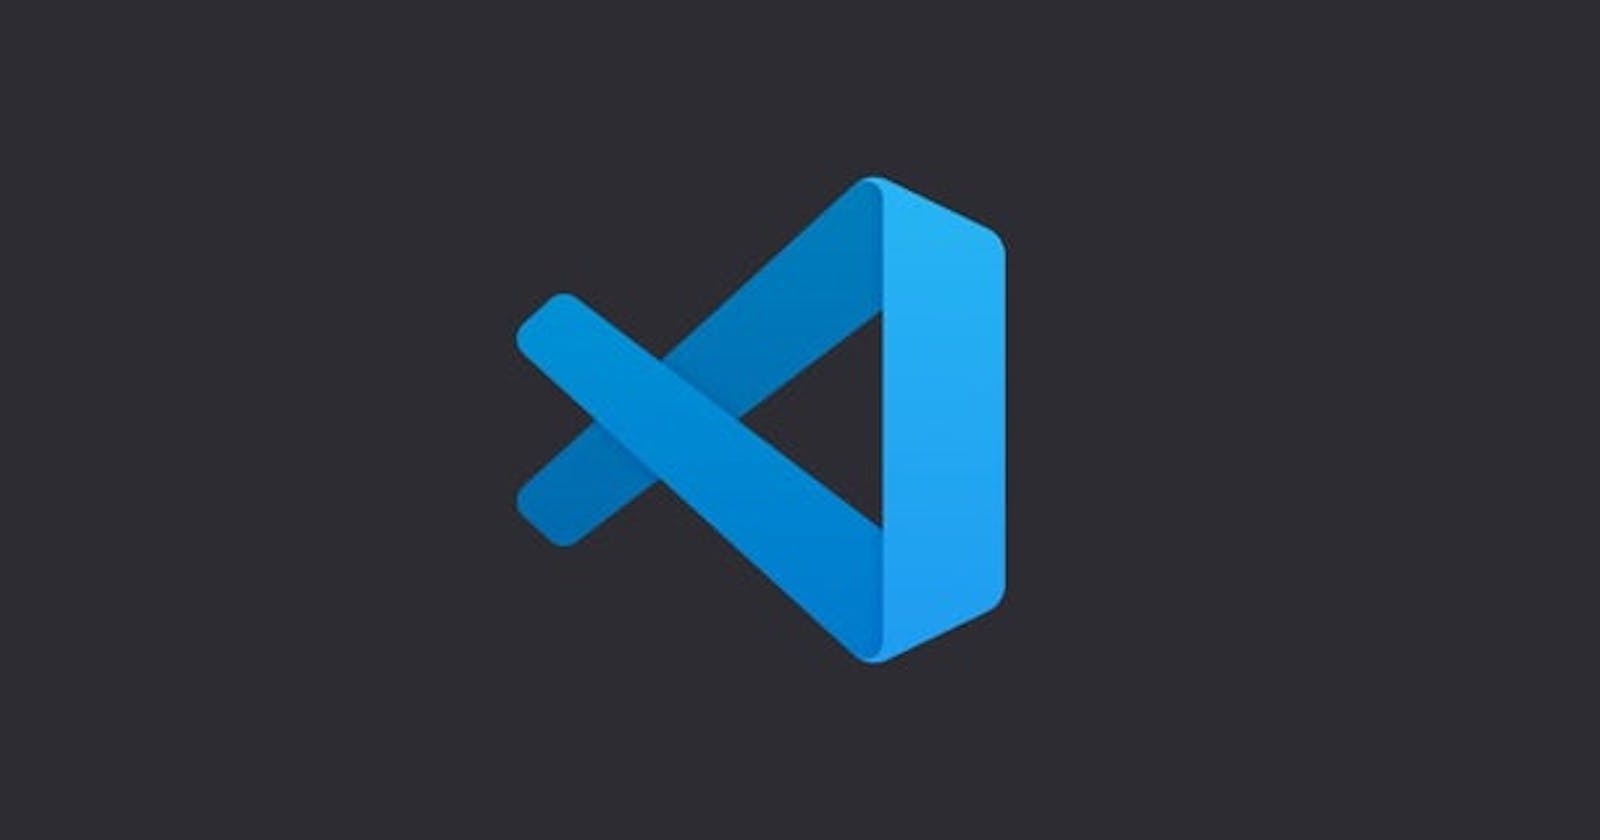 Visual Studio Code - Tips & Tricks - Command Palette and its friends